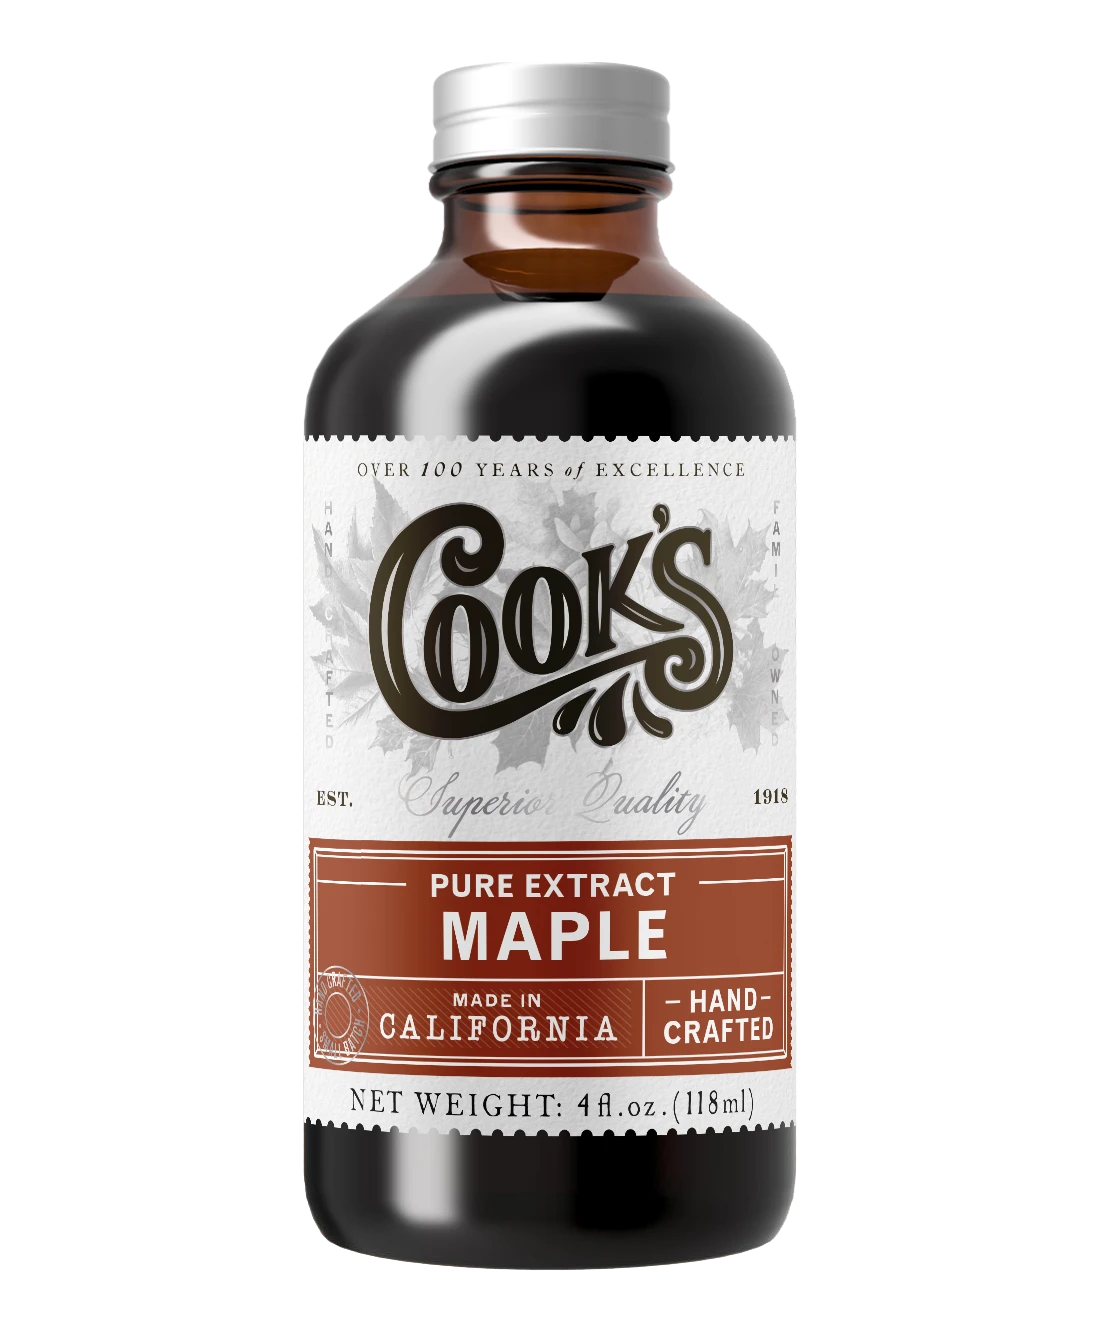 Pure Maple Extract